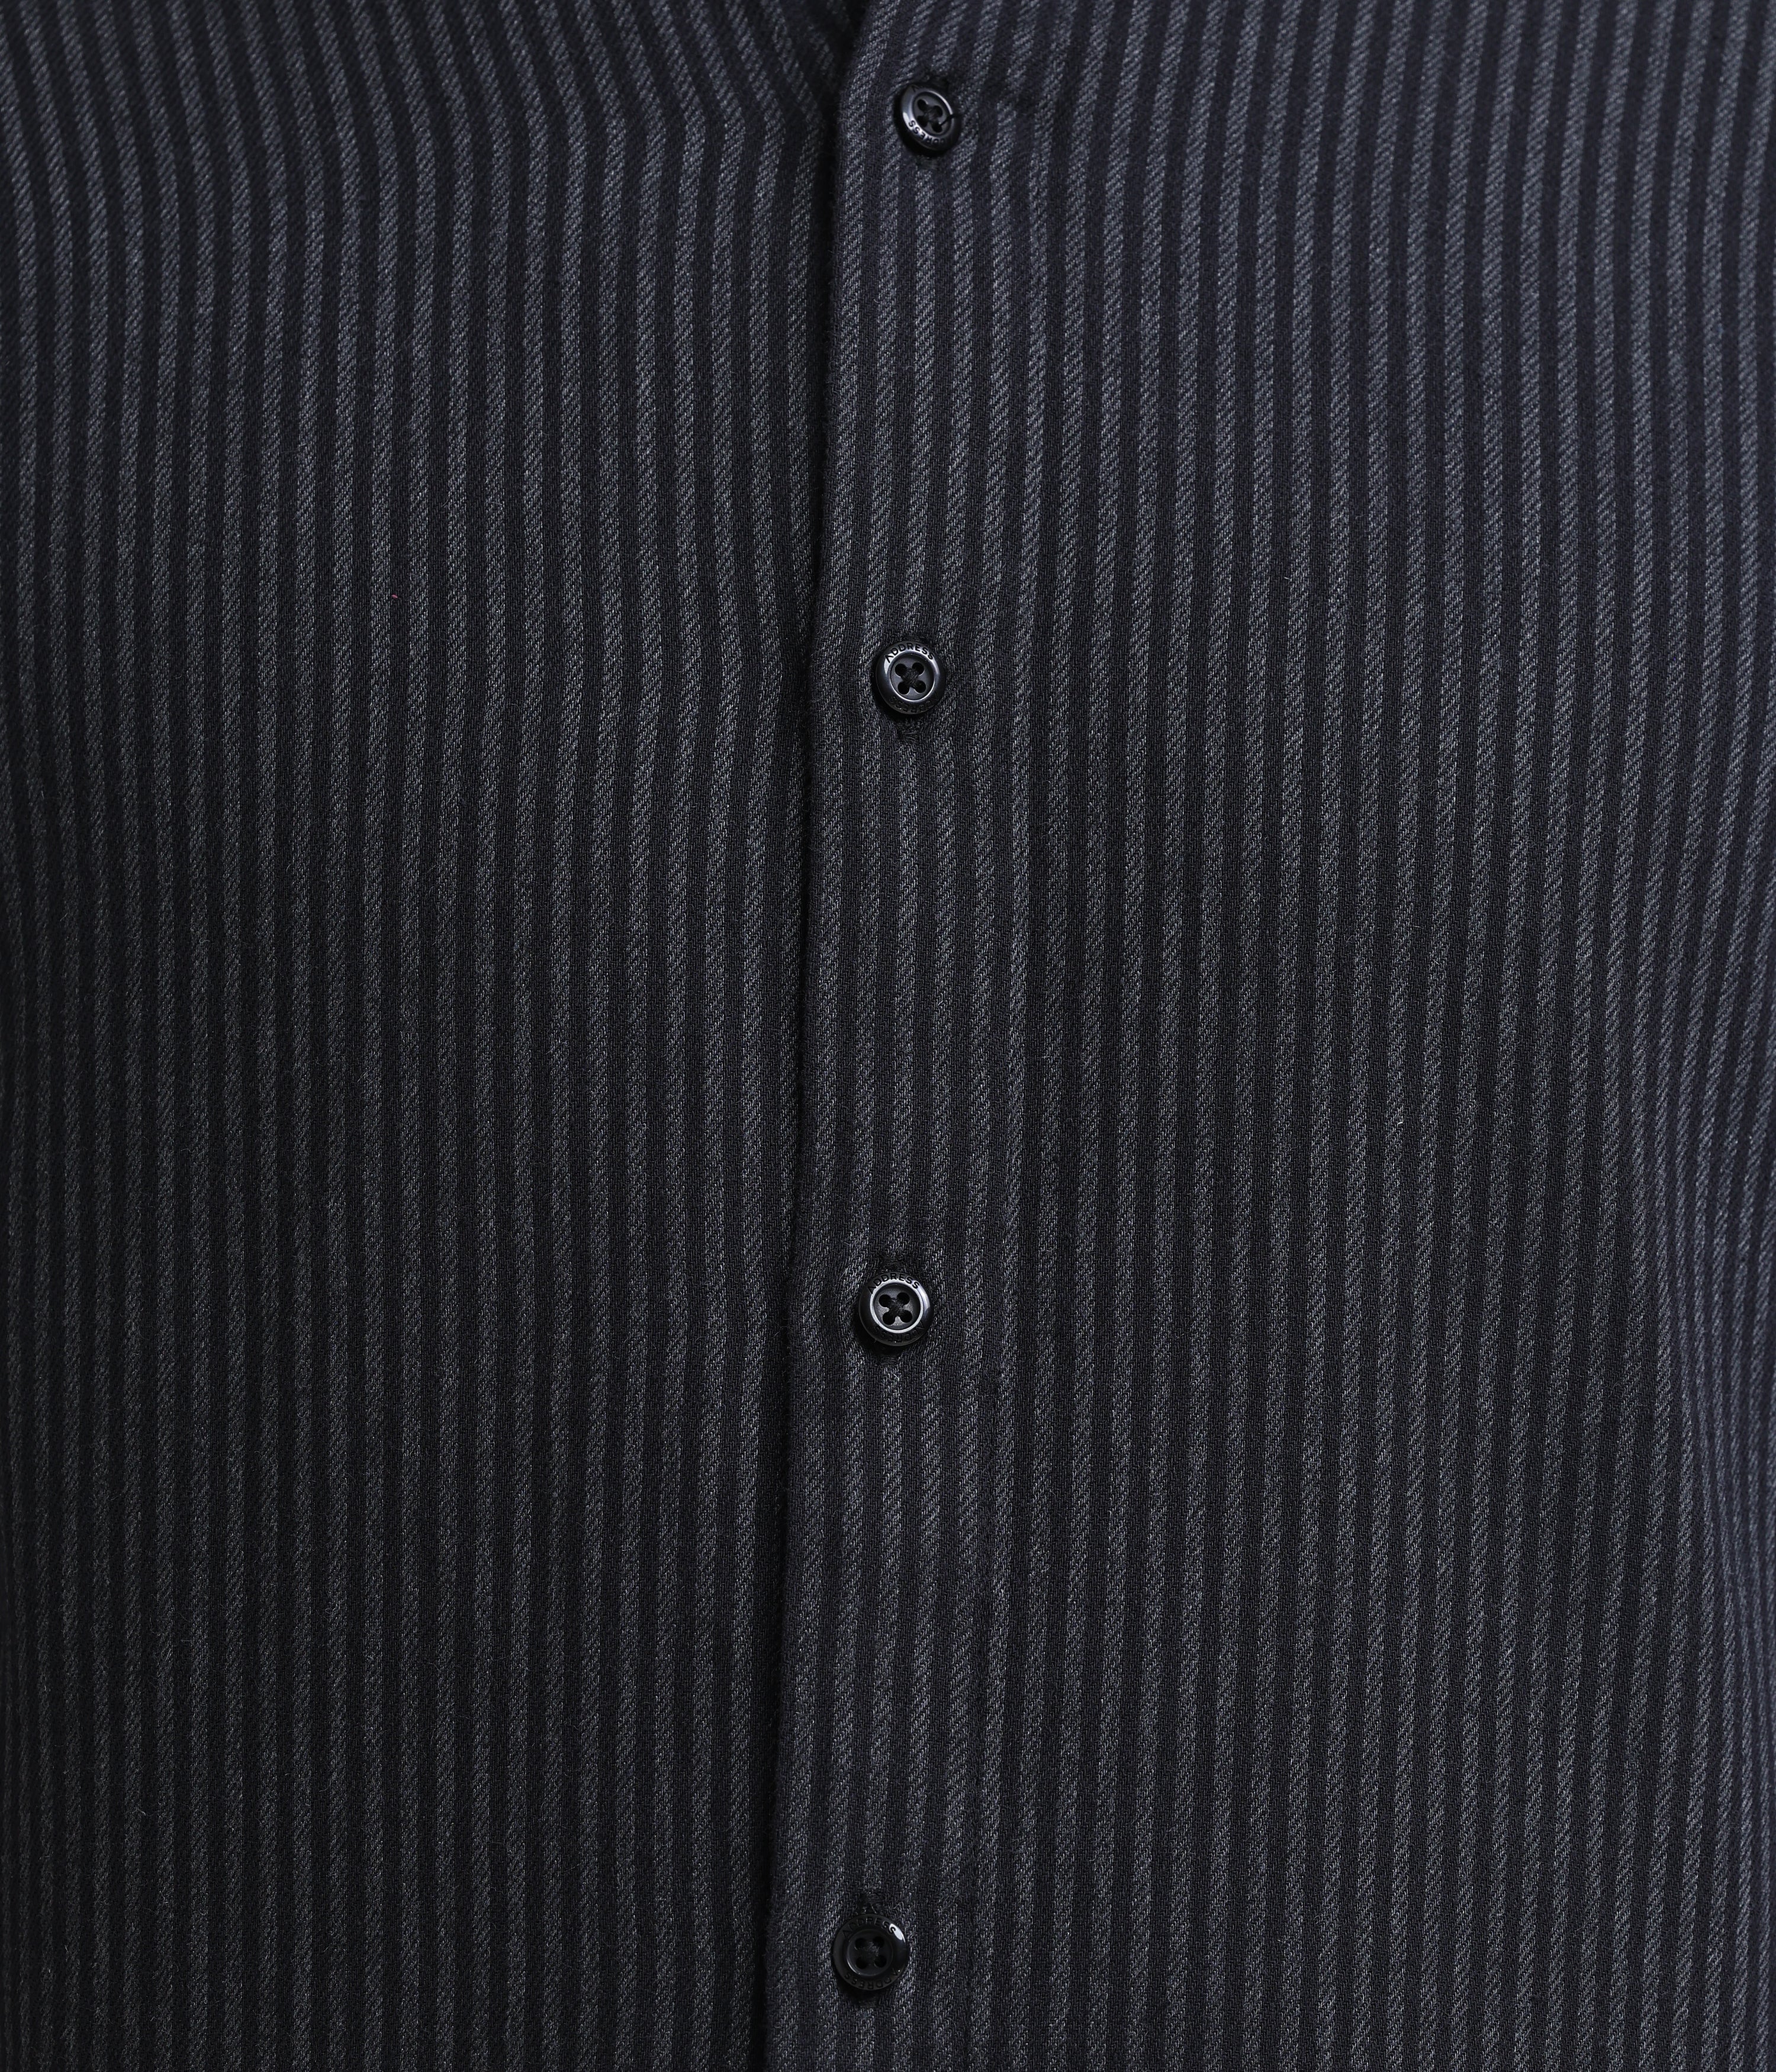 Striped Black Full Sleeve Tapered Fit Shirt